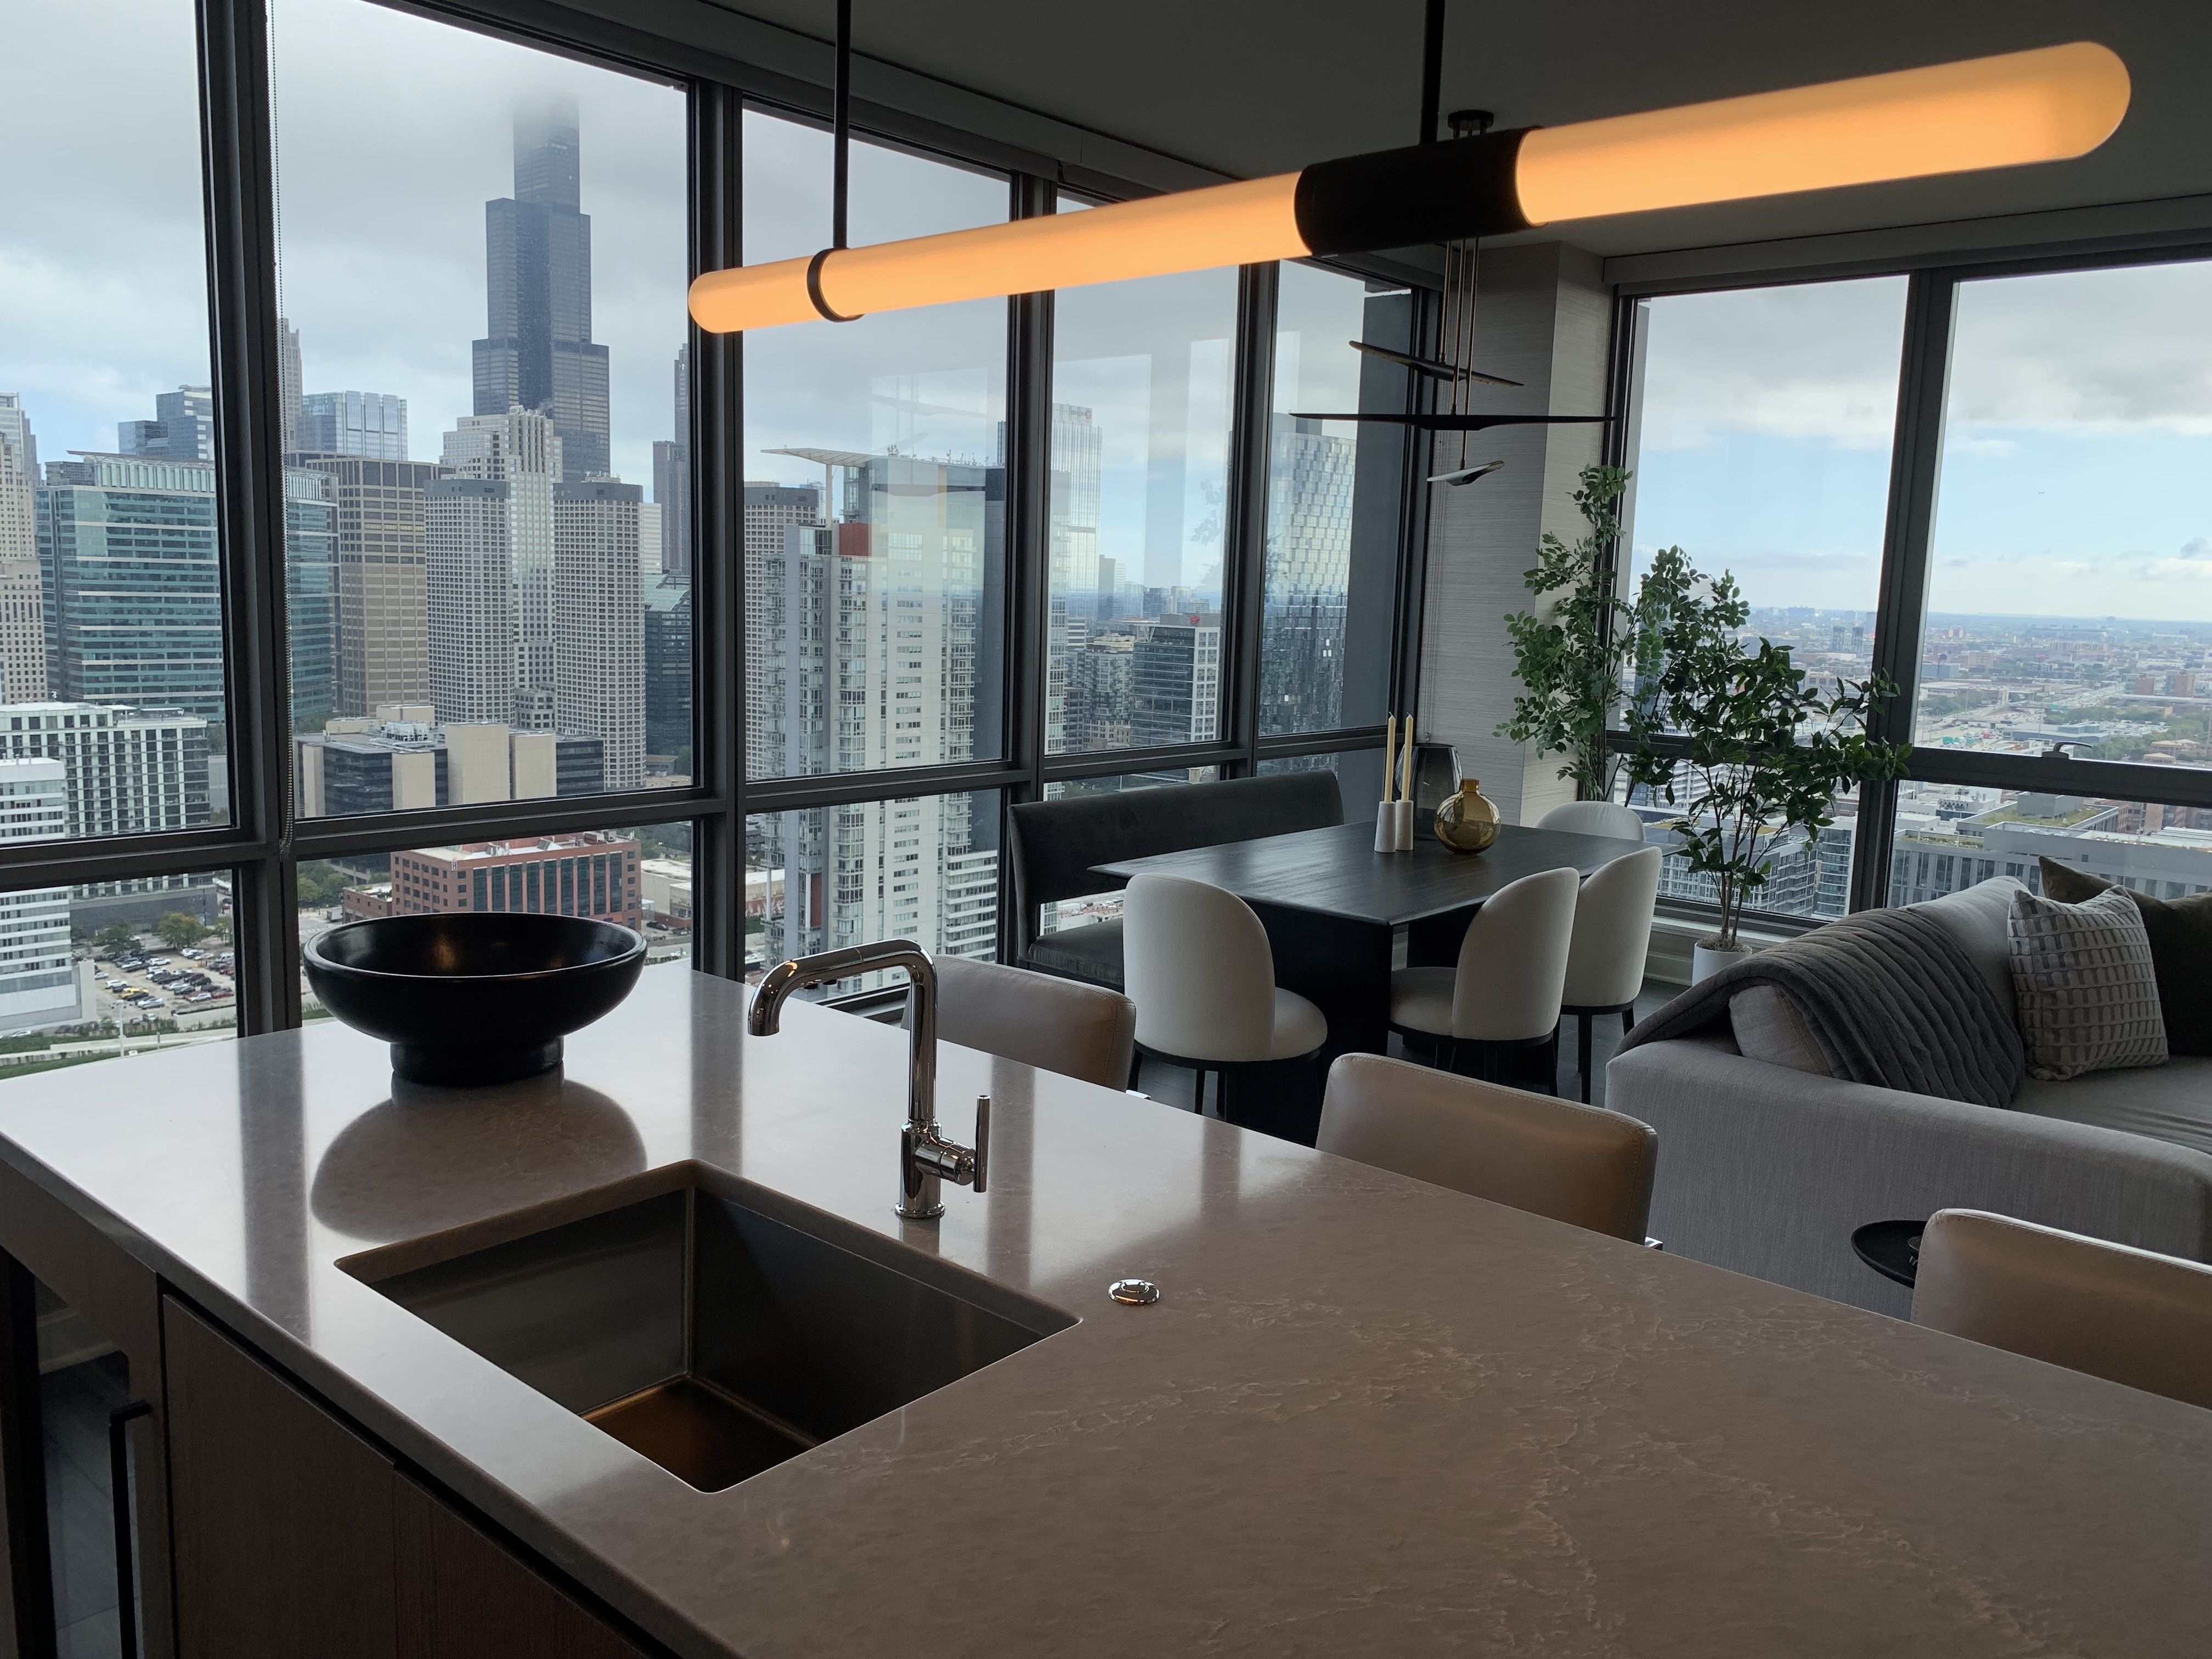 Photo of a kitchen and a view of a city skyline 